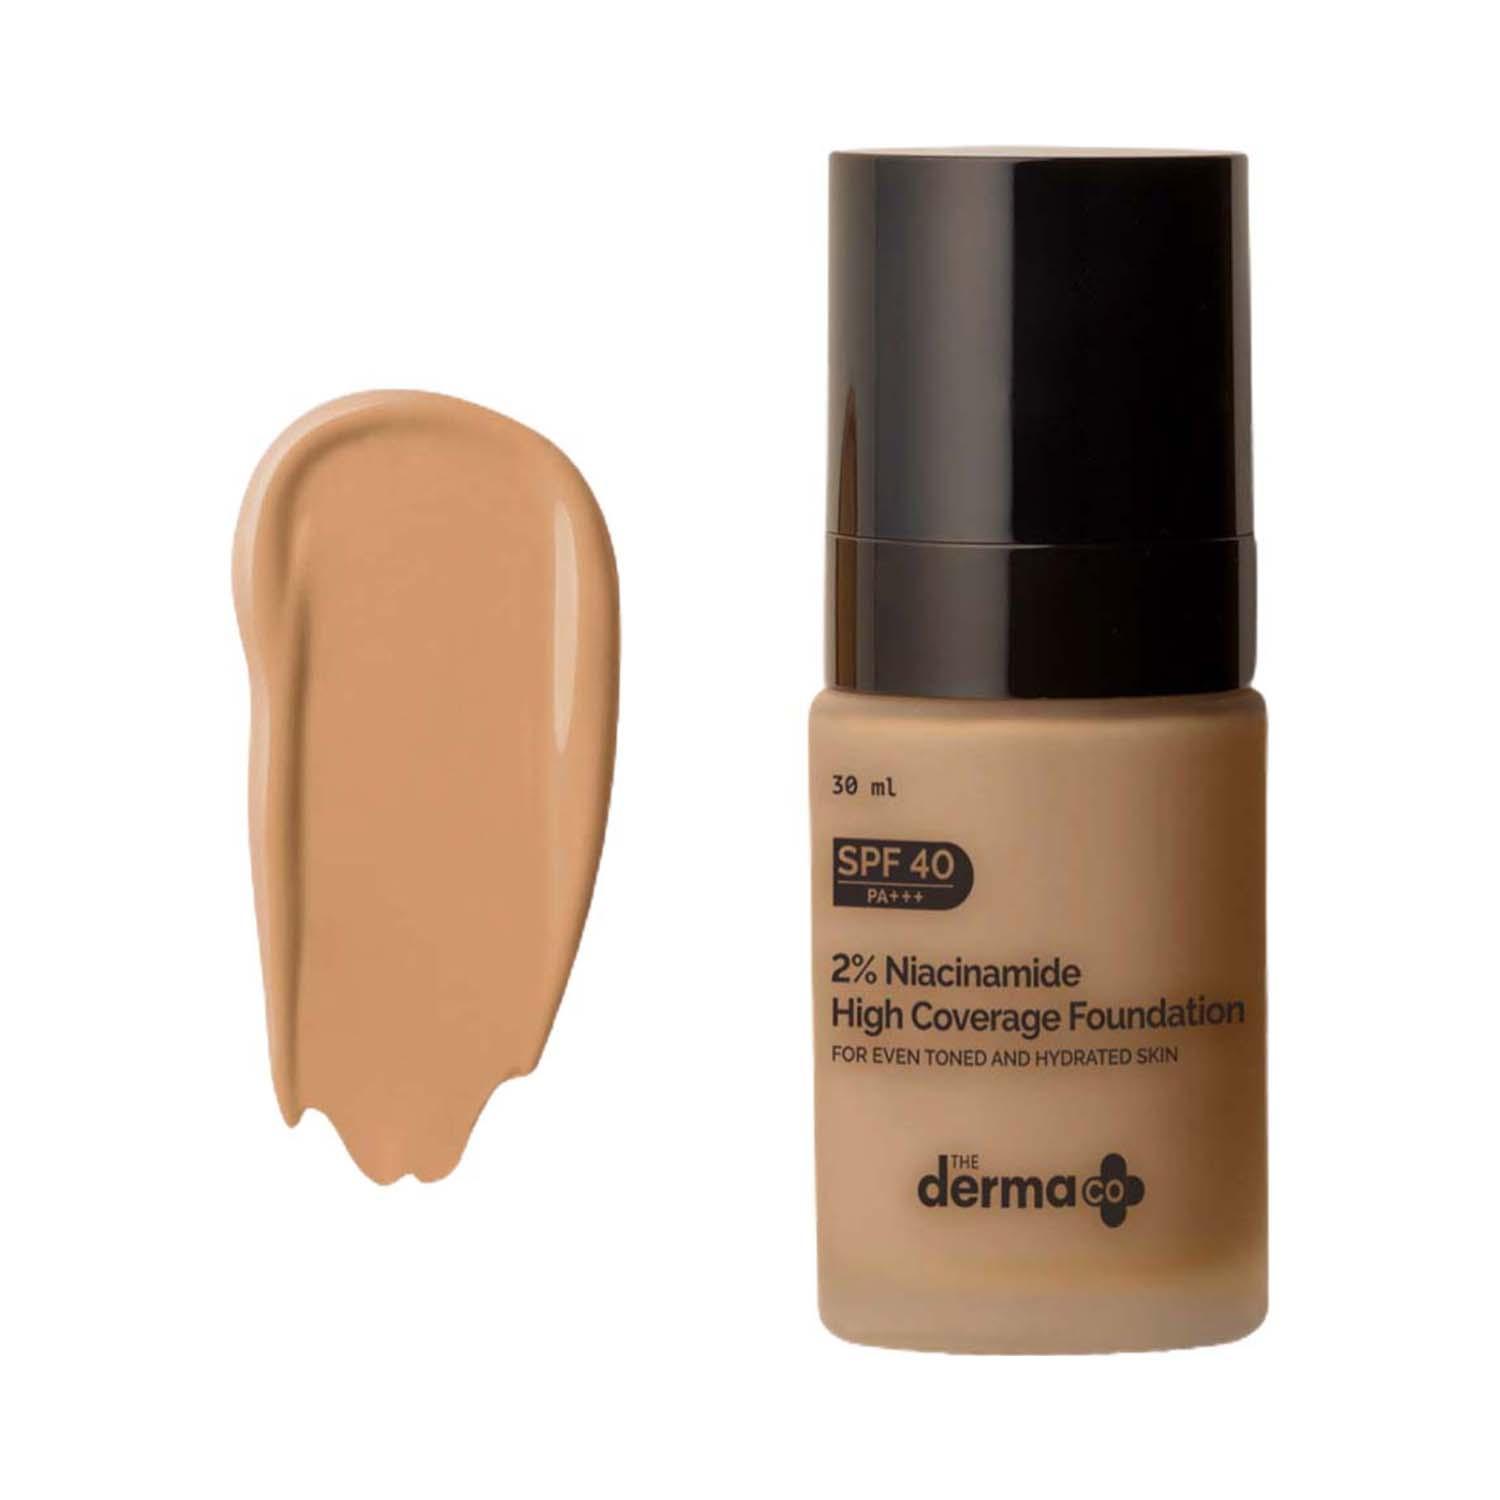 The Derma Co | The Derma Co. 2% Niacinamide & 1% Hyaluronic Acid Foundation With SPF 40 PA+++ - Natural (30 g)